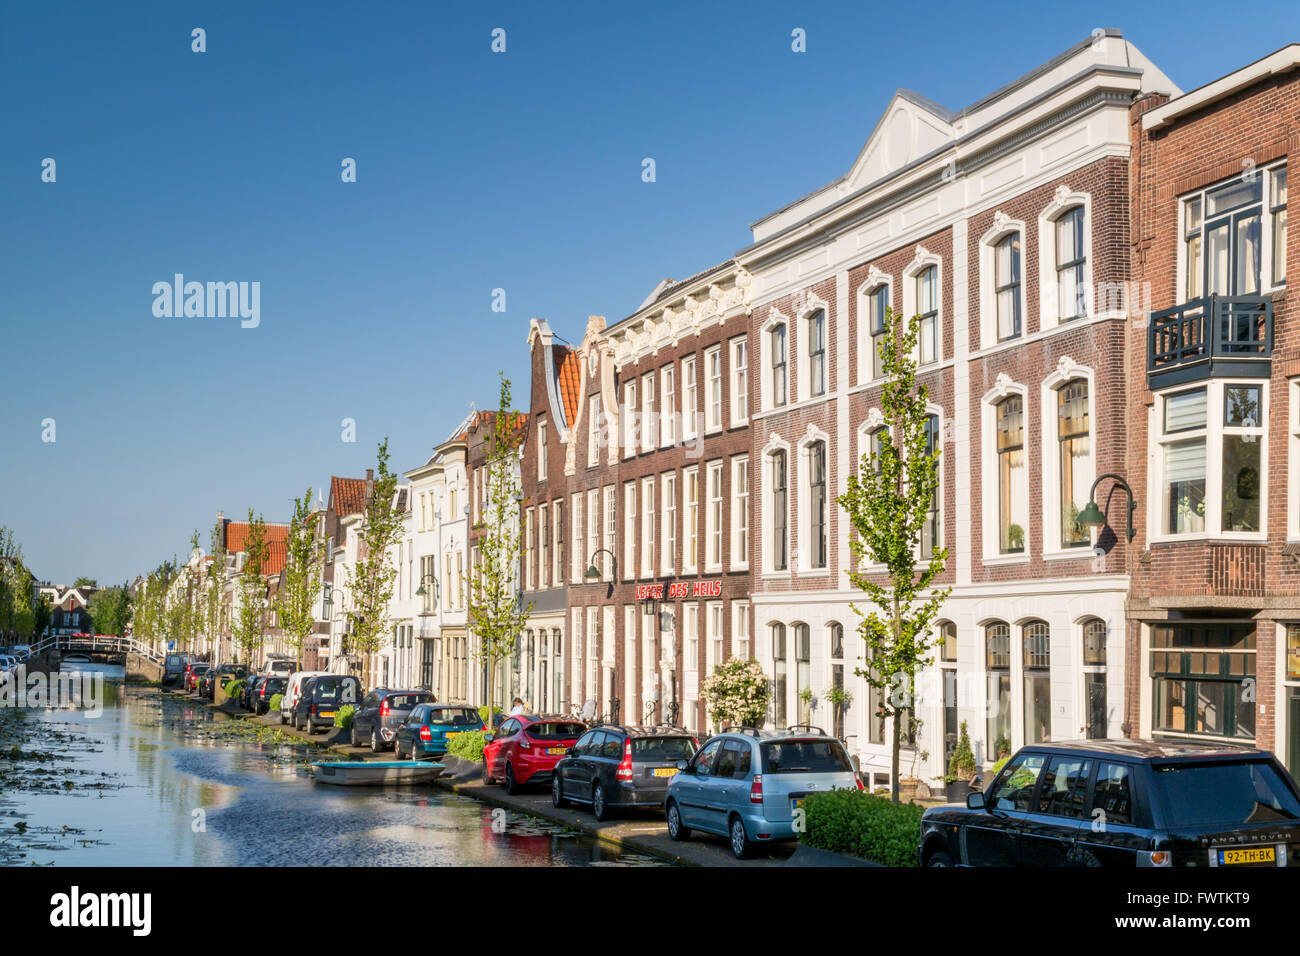 Facades of old houses, Turfmarkt canal in the city of Gouda, Netherlands Stock Photo